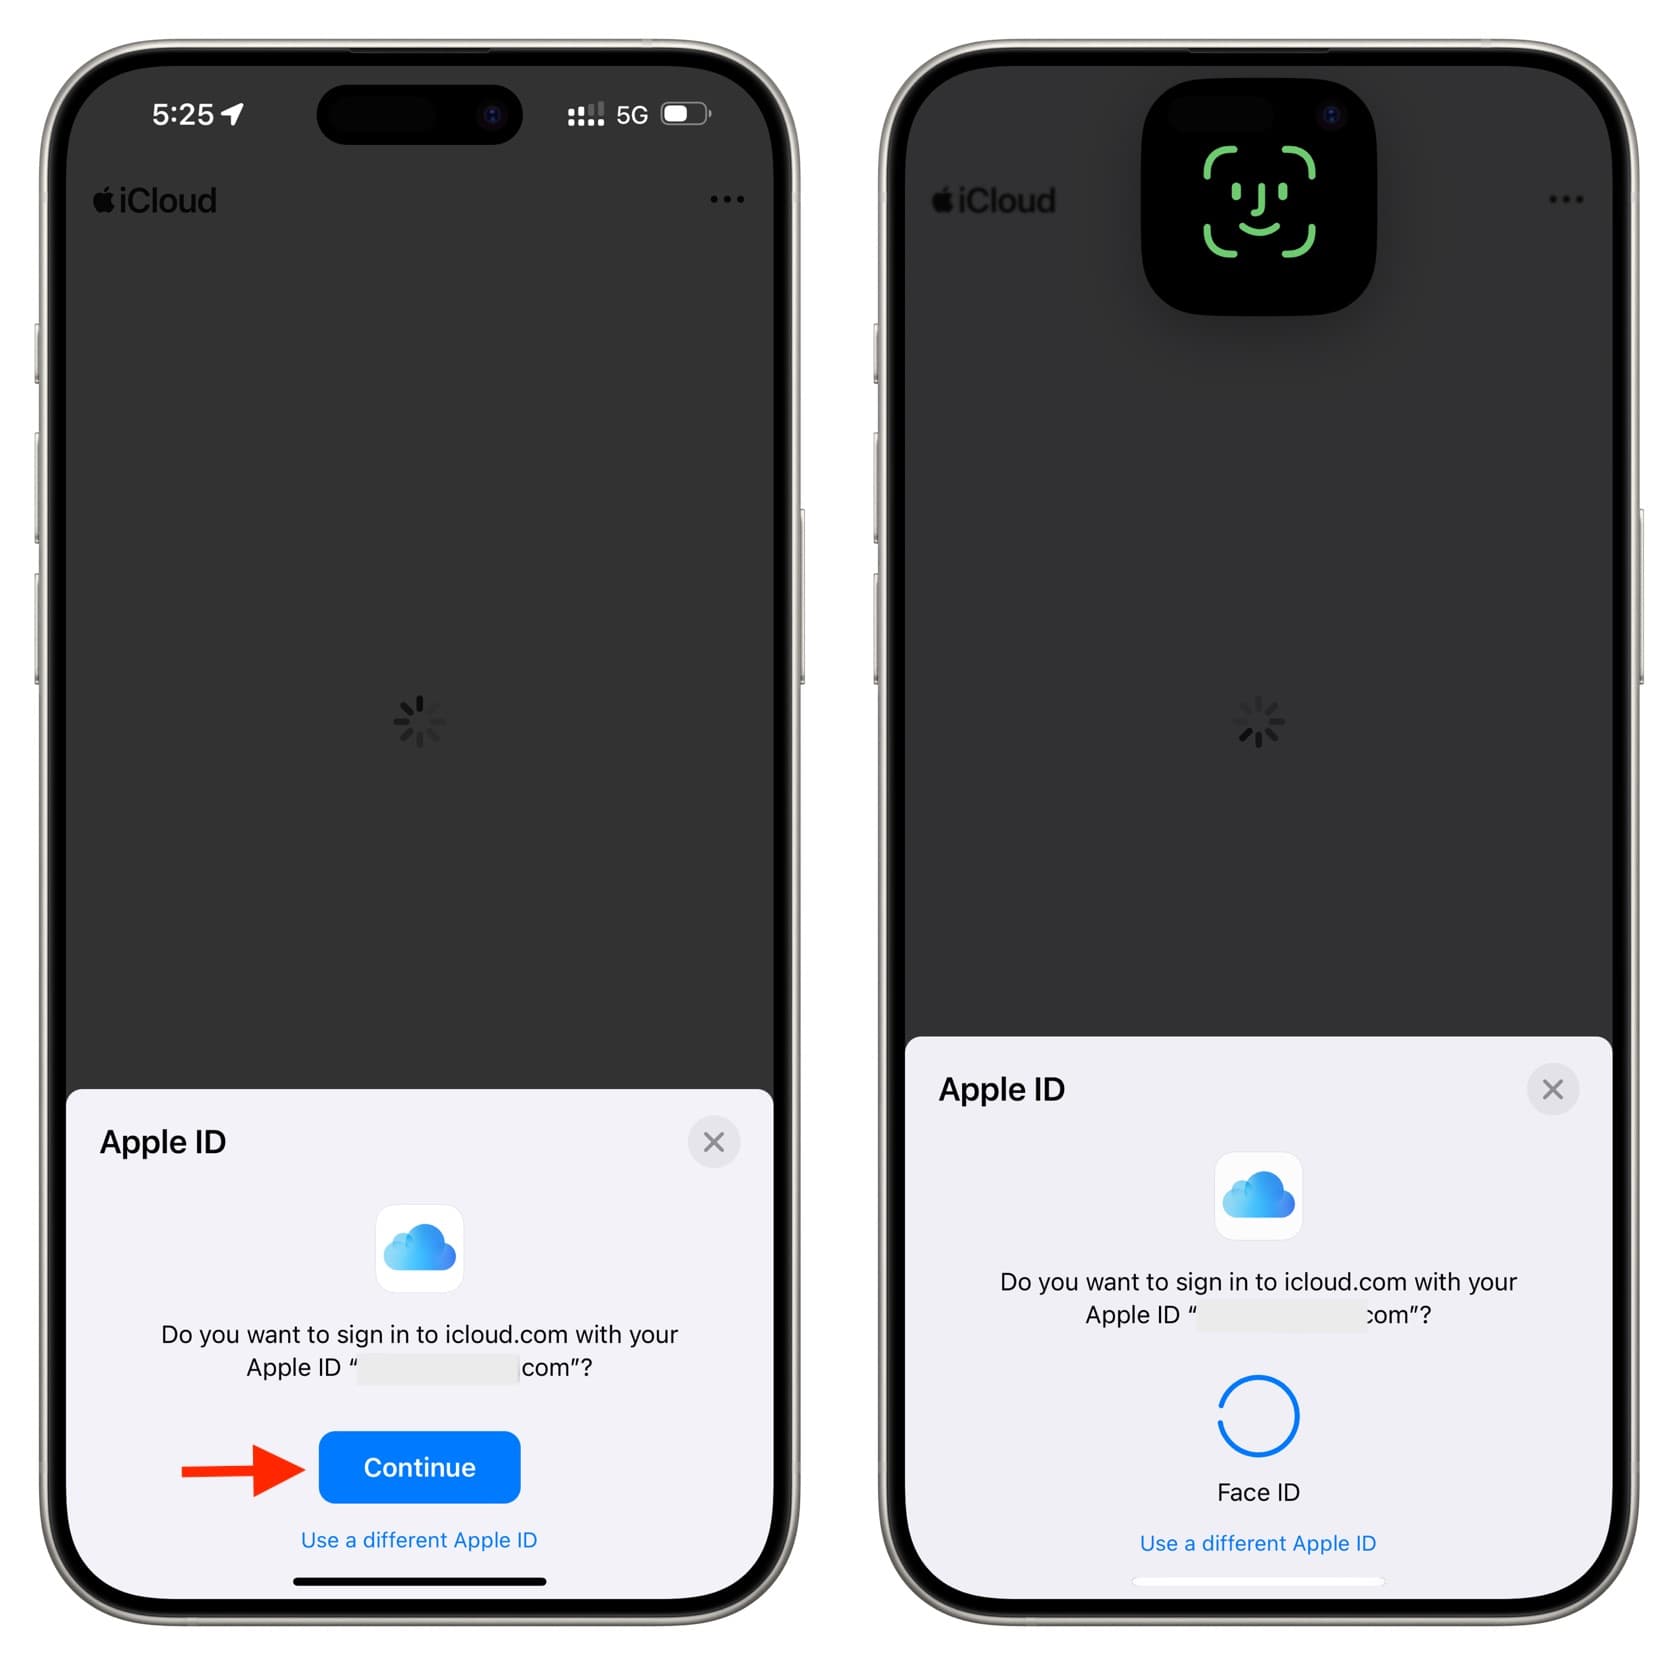 Continue and log in to iCloud web using Face ID